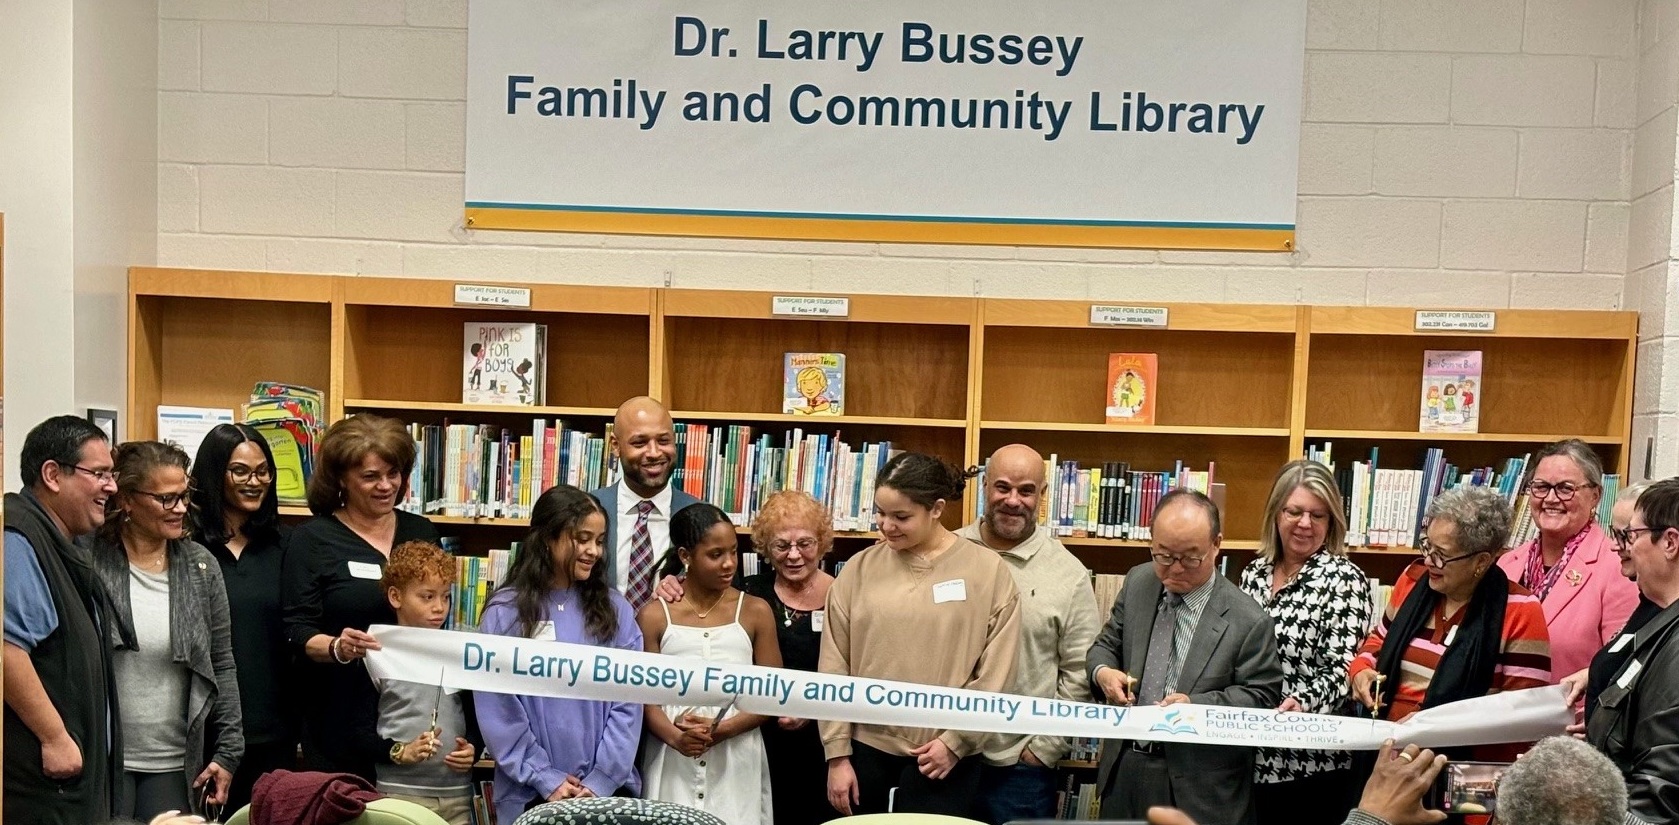 Dr. Reid at the dedication of the Dr. Larry Bussey Family and Community Library